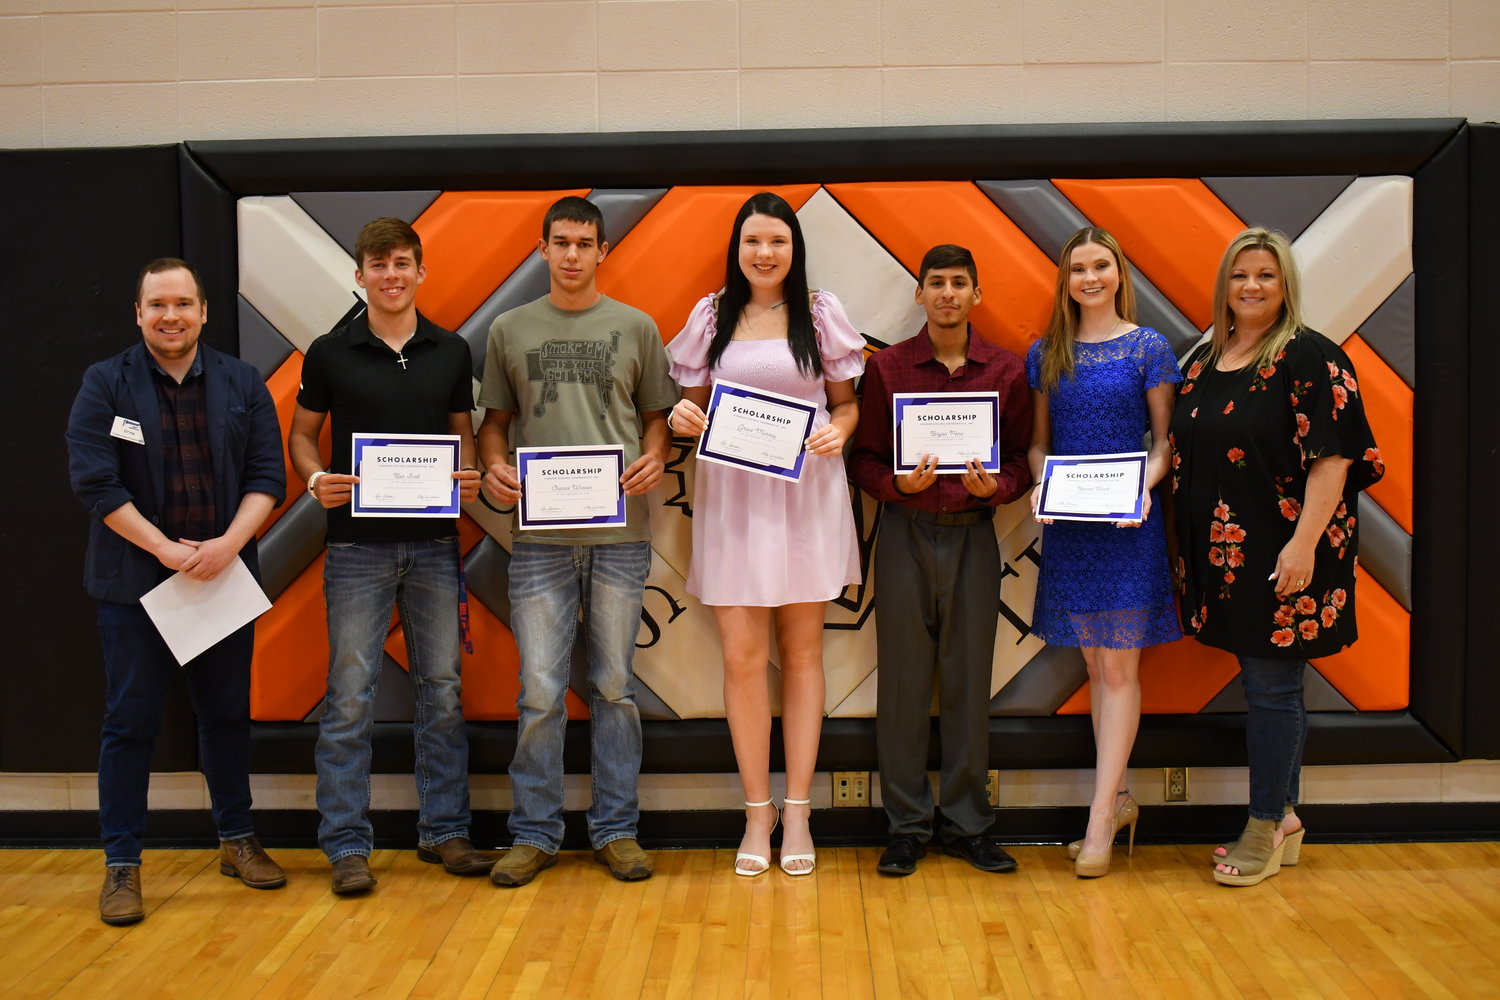 Senior Awards — Ben Scott, Chance Winner, Grace Murray, Bryan Peña, and Becca Rock were given the Pioneer Electric Scholarships from Drew Waechter and Rae Gorman on Friday, May 13, 2022.